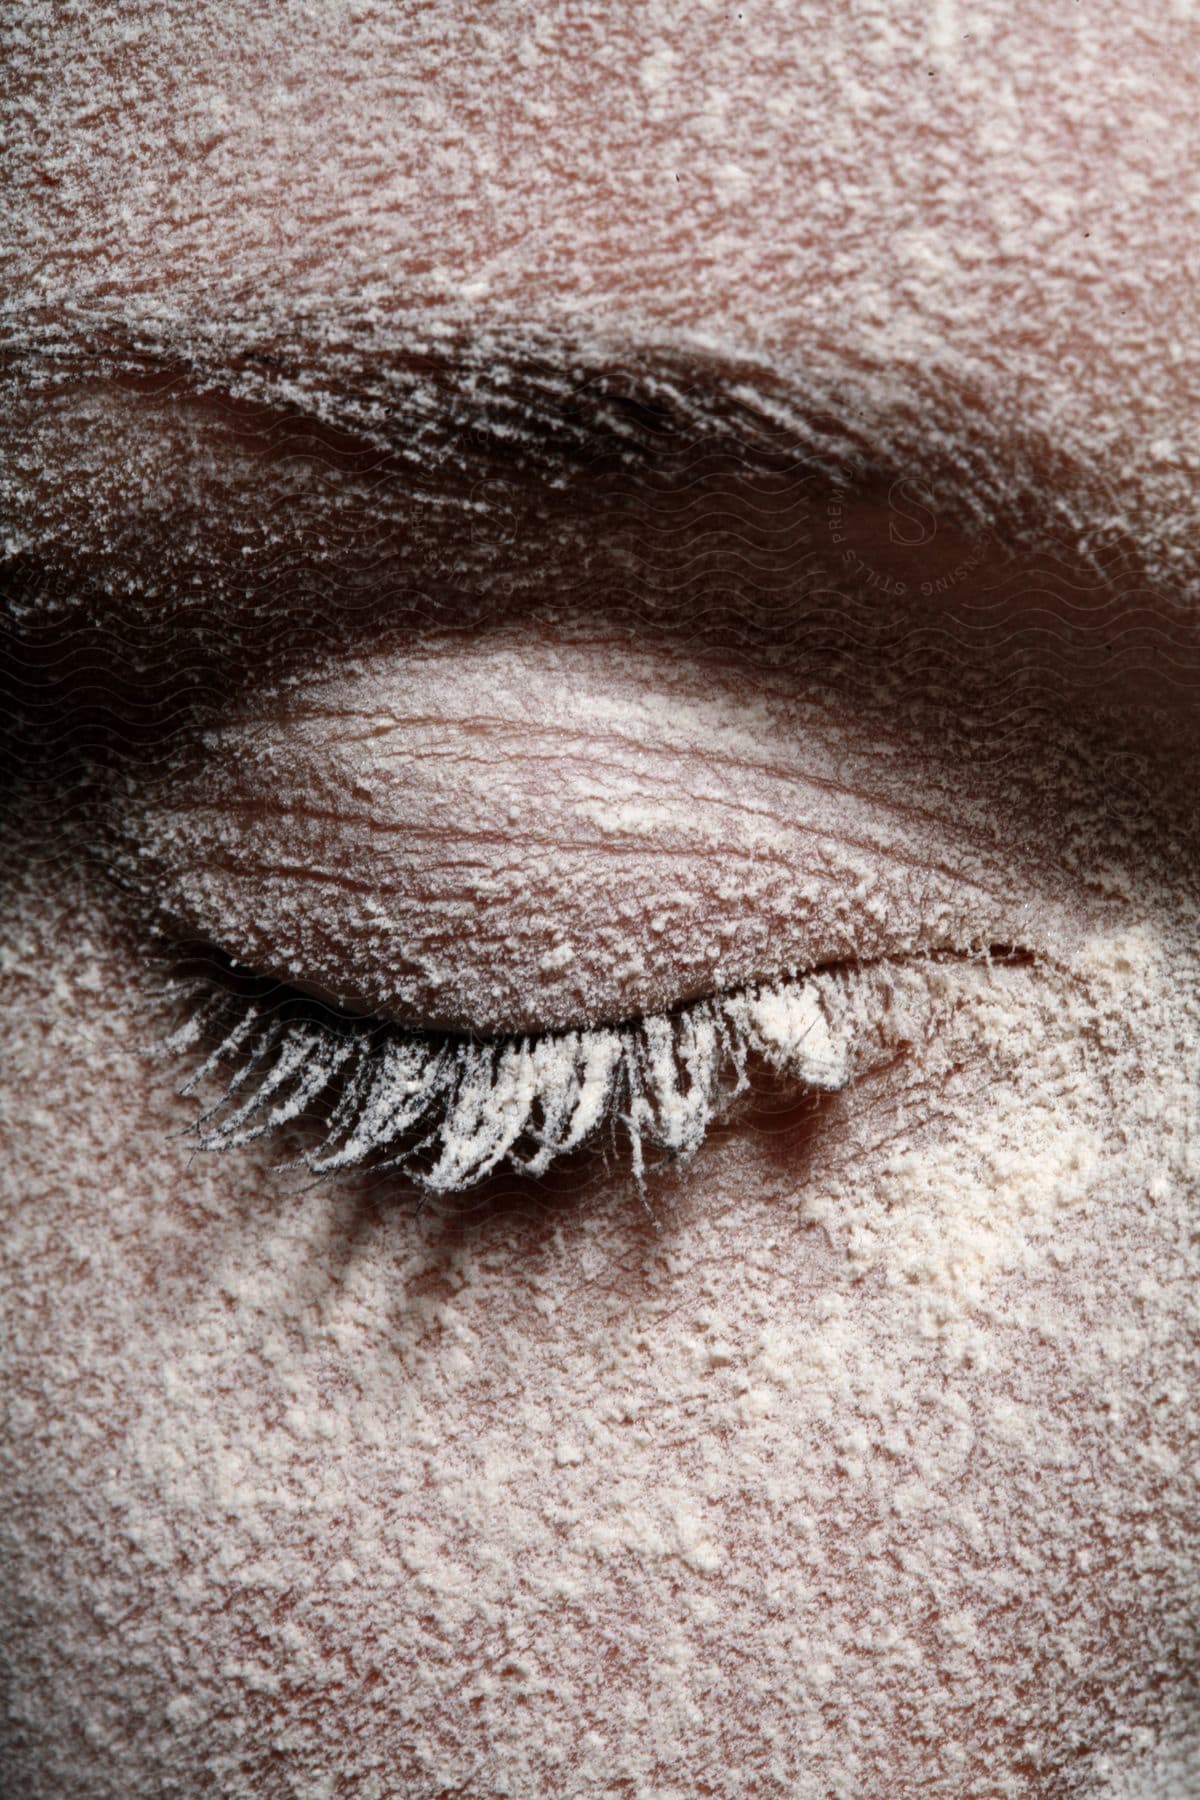 Close-up tip of a closed eye with white powder and eyelashes.